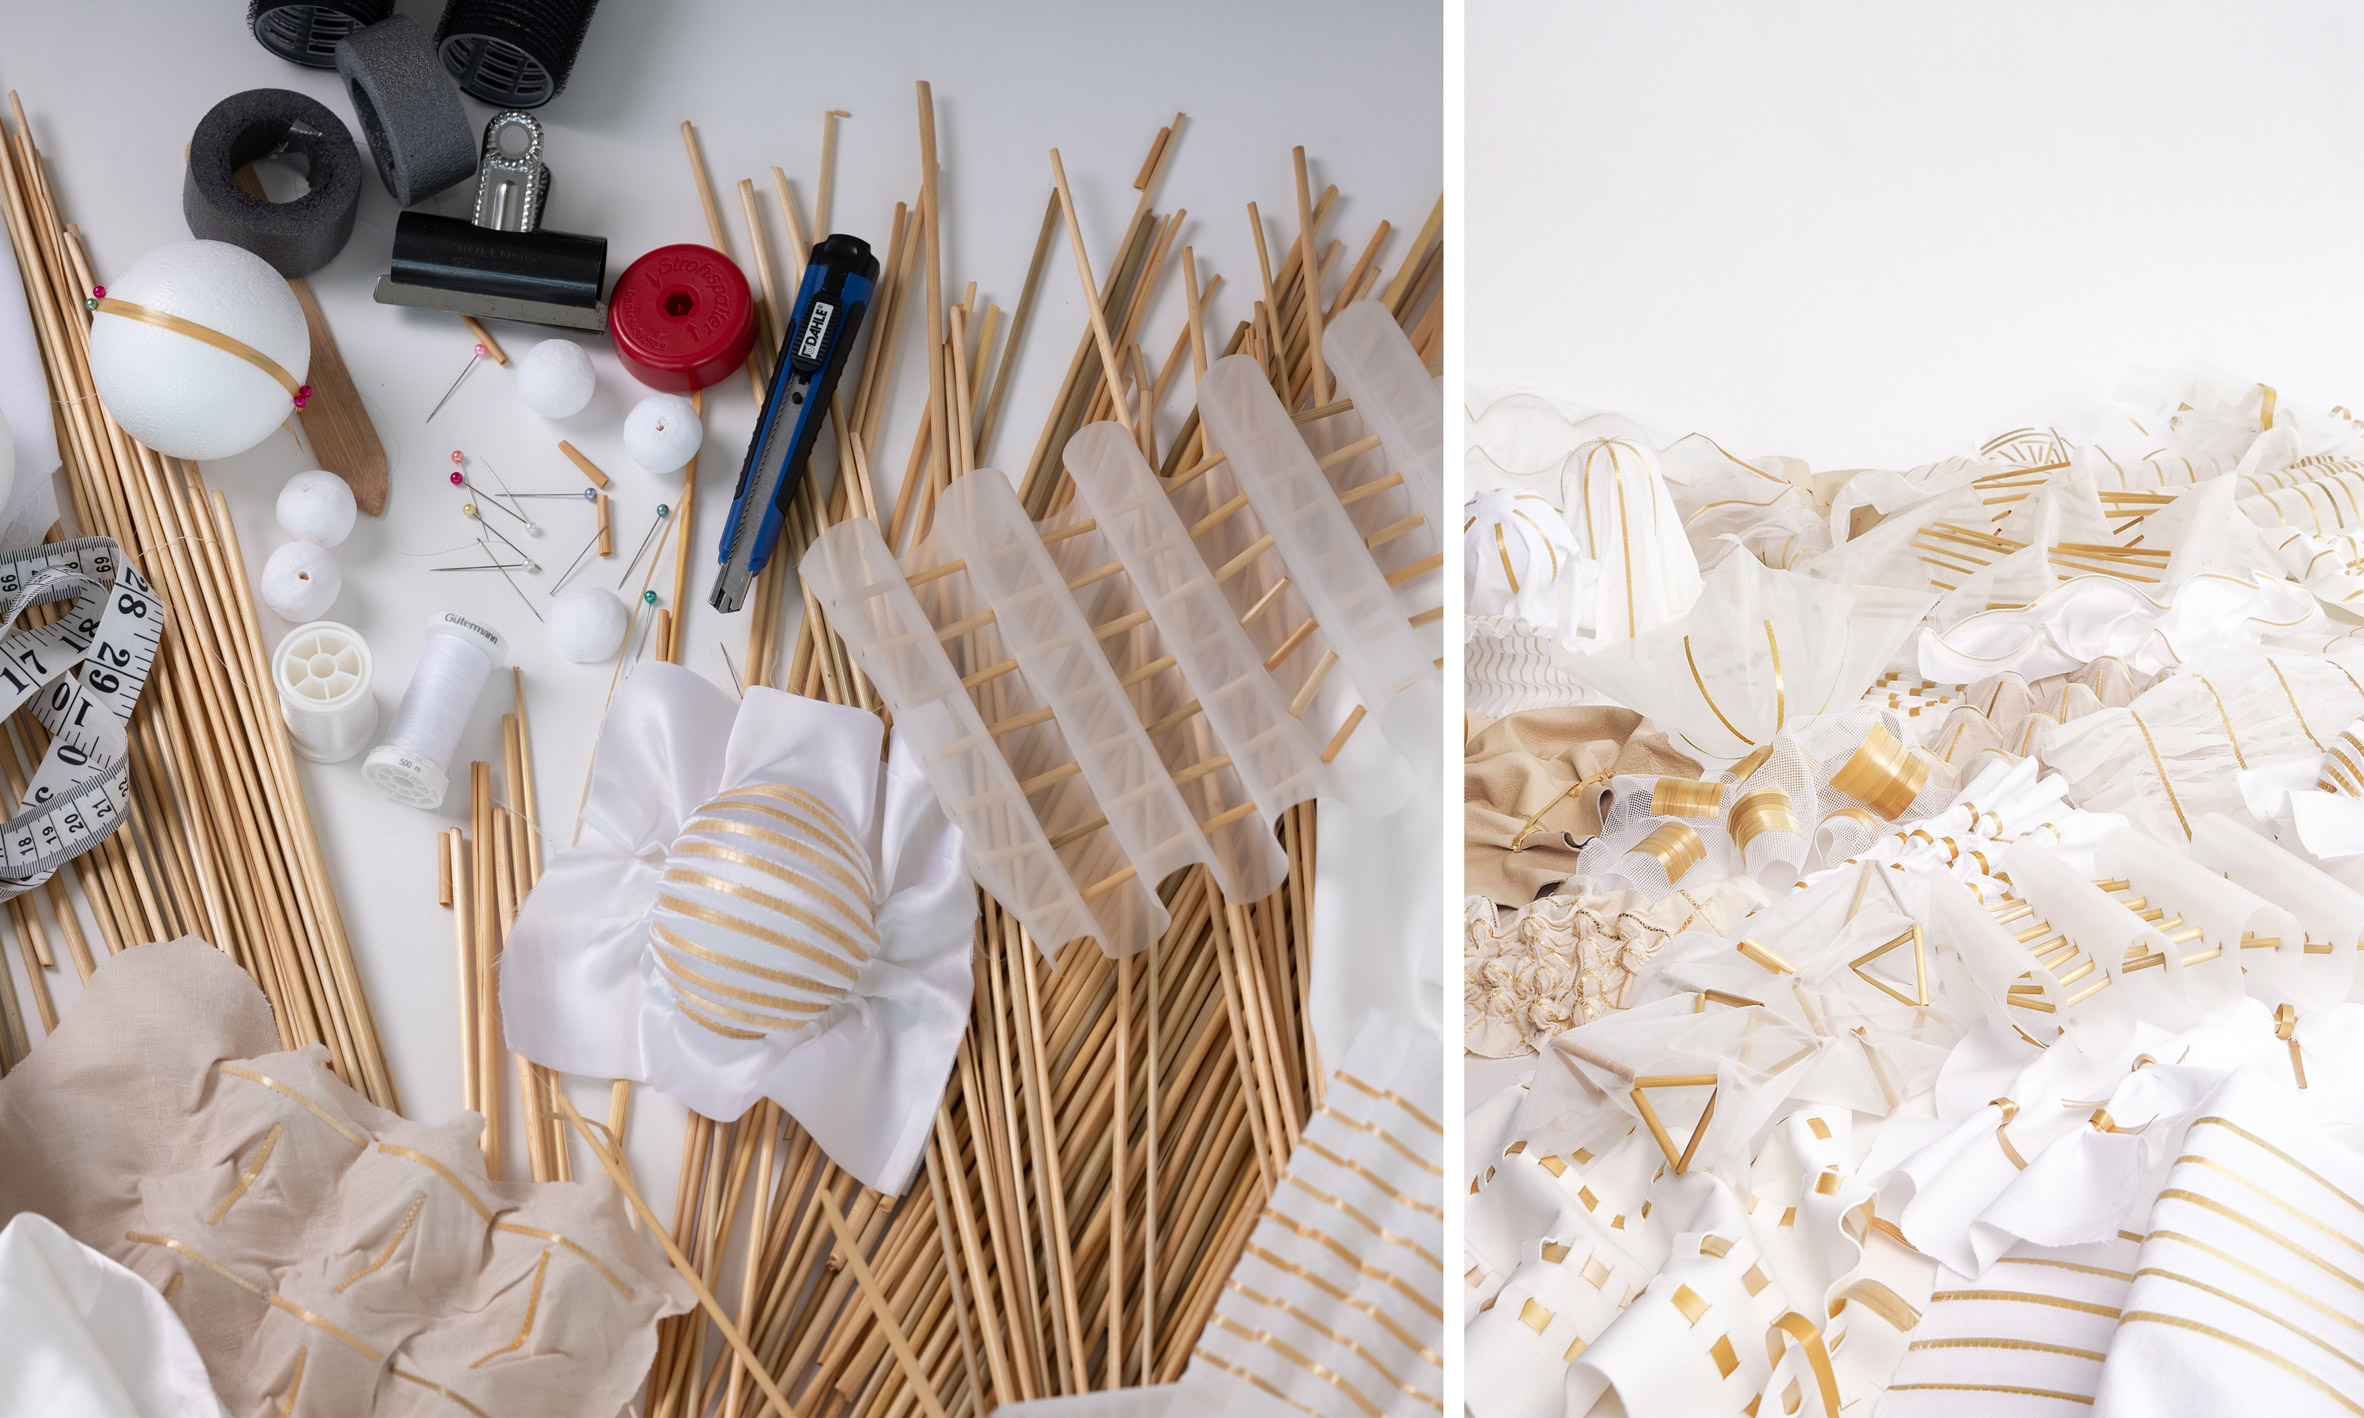 Textiles that use straw